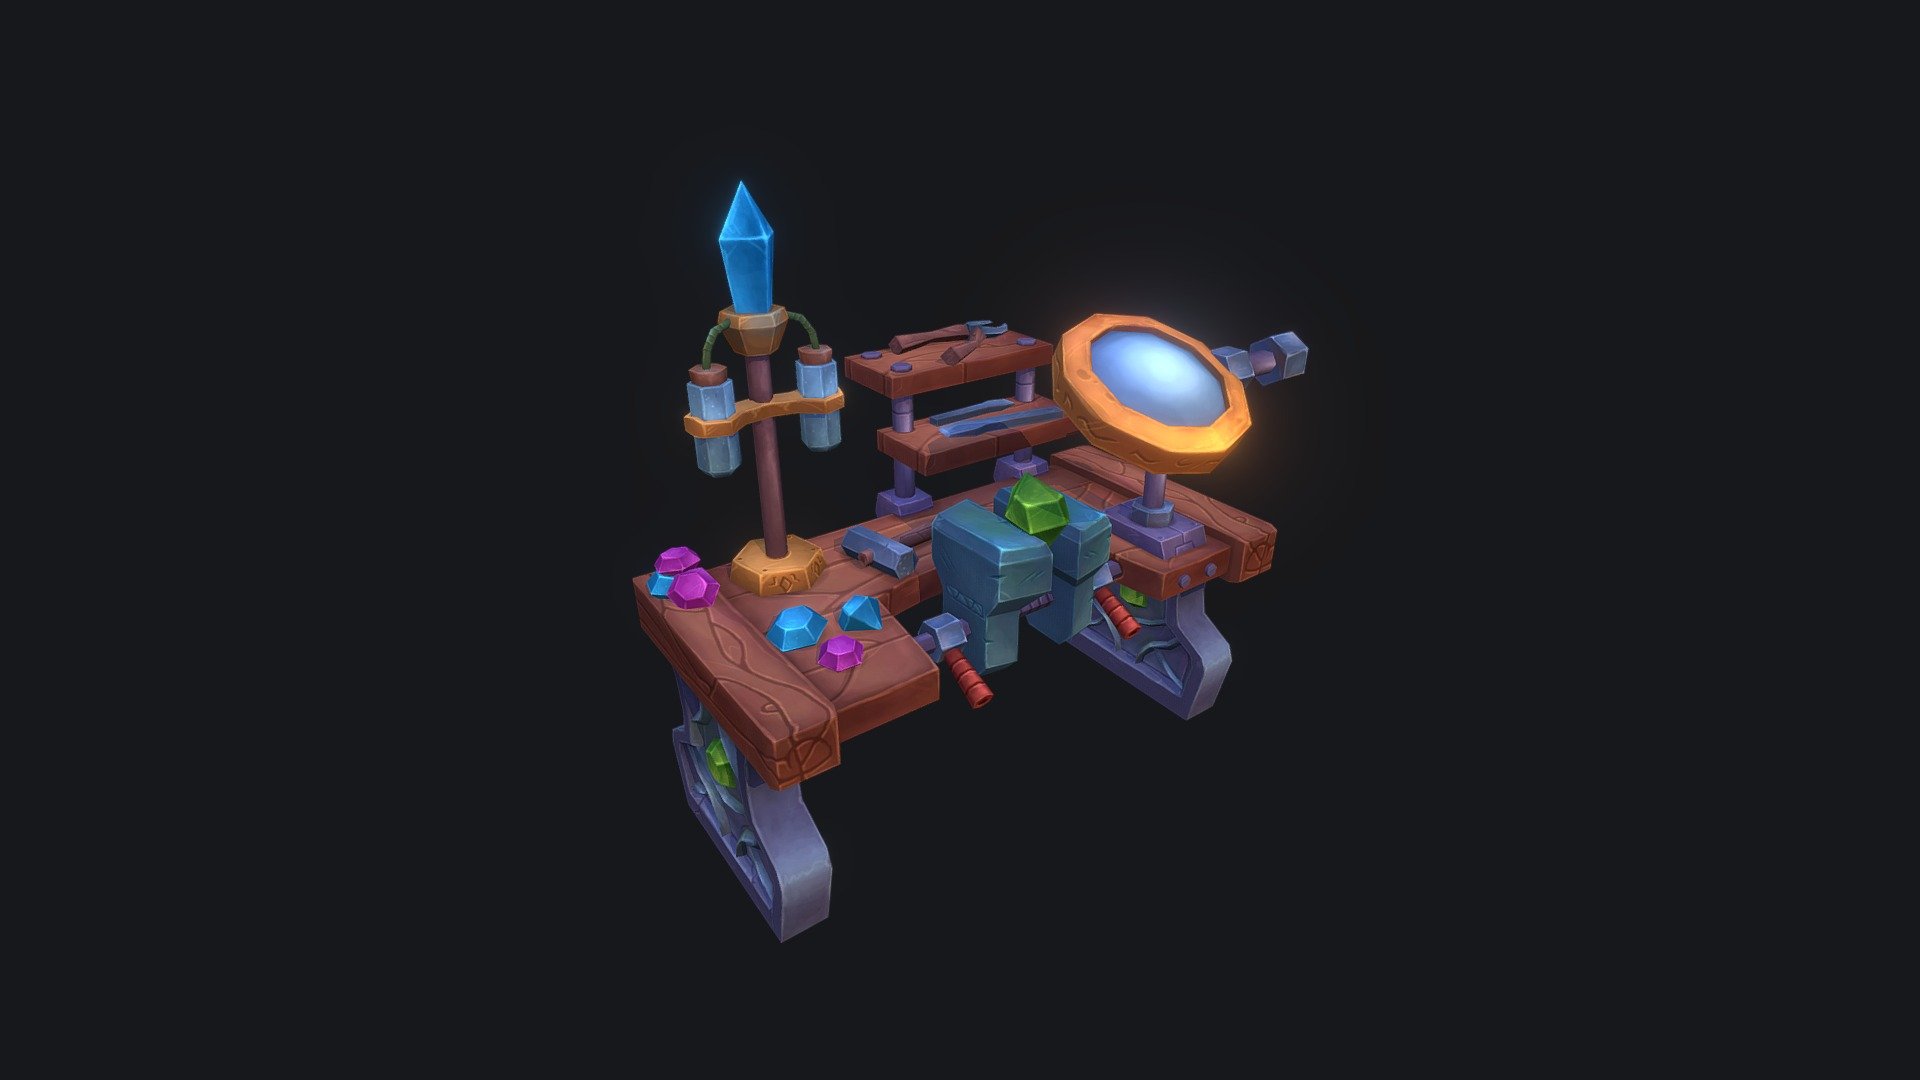 It will be using for Jewelry crafting in upcoming RPG &ldquo;Tanzia